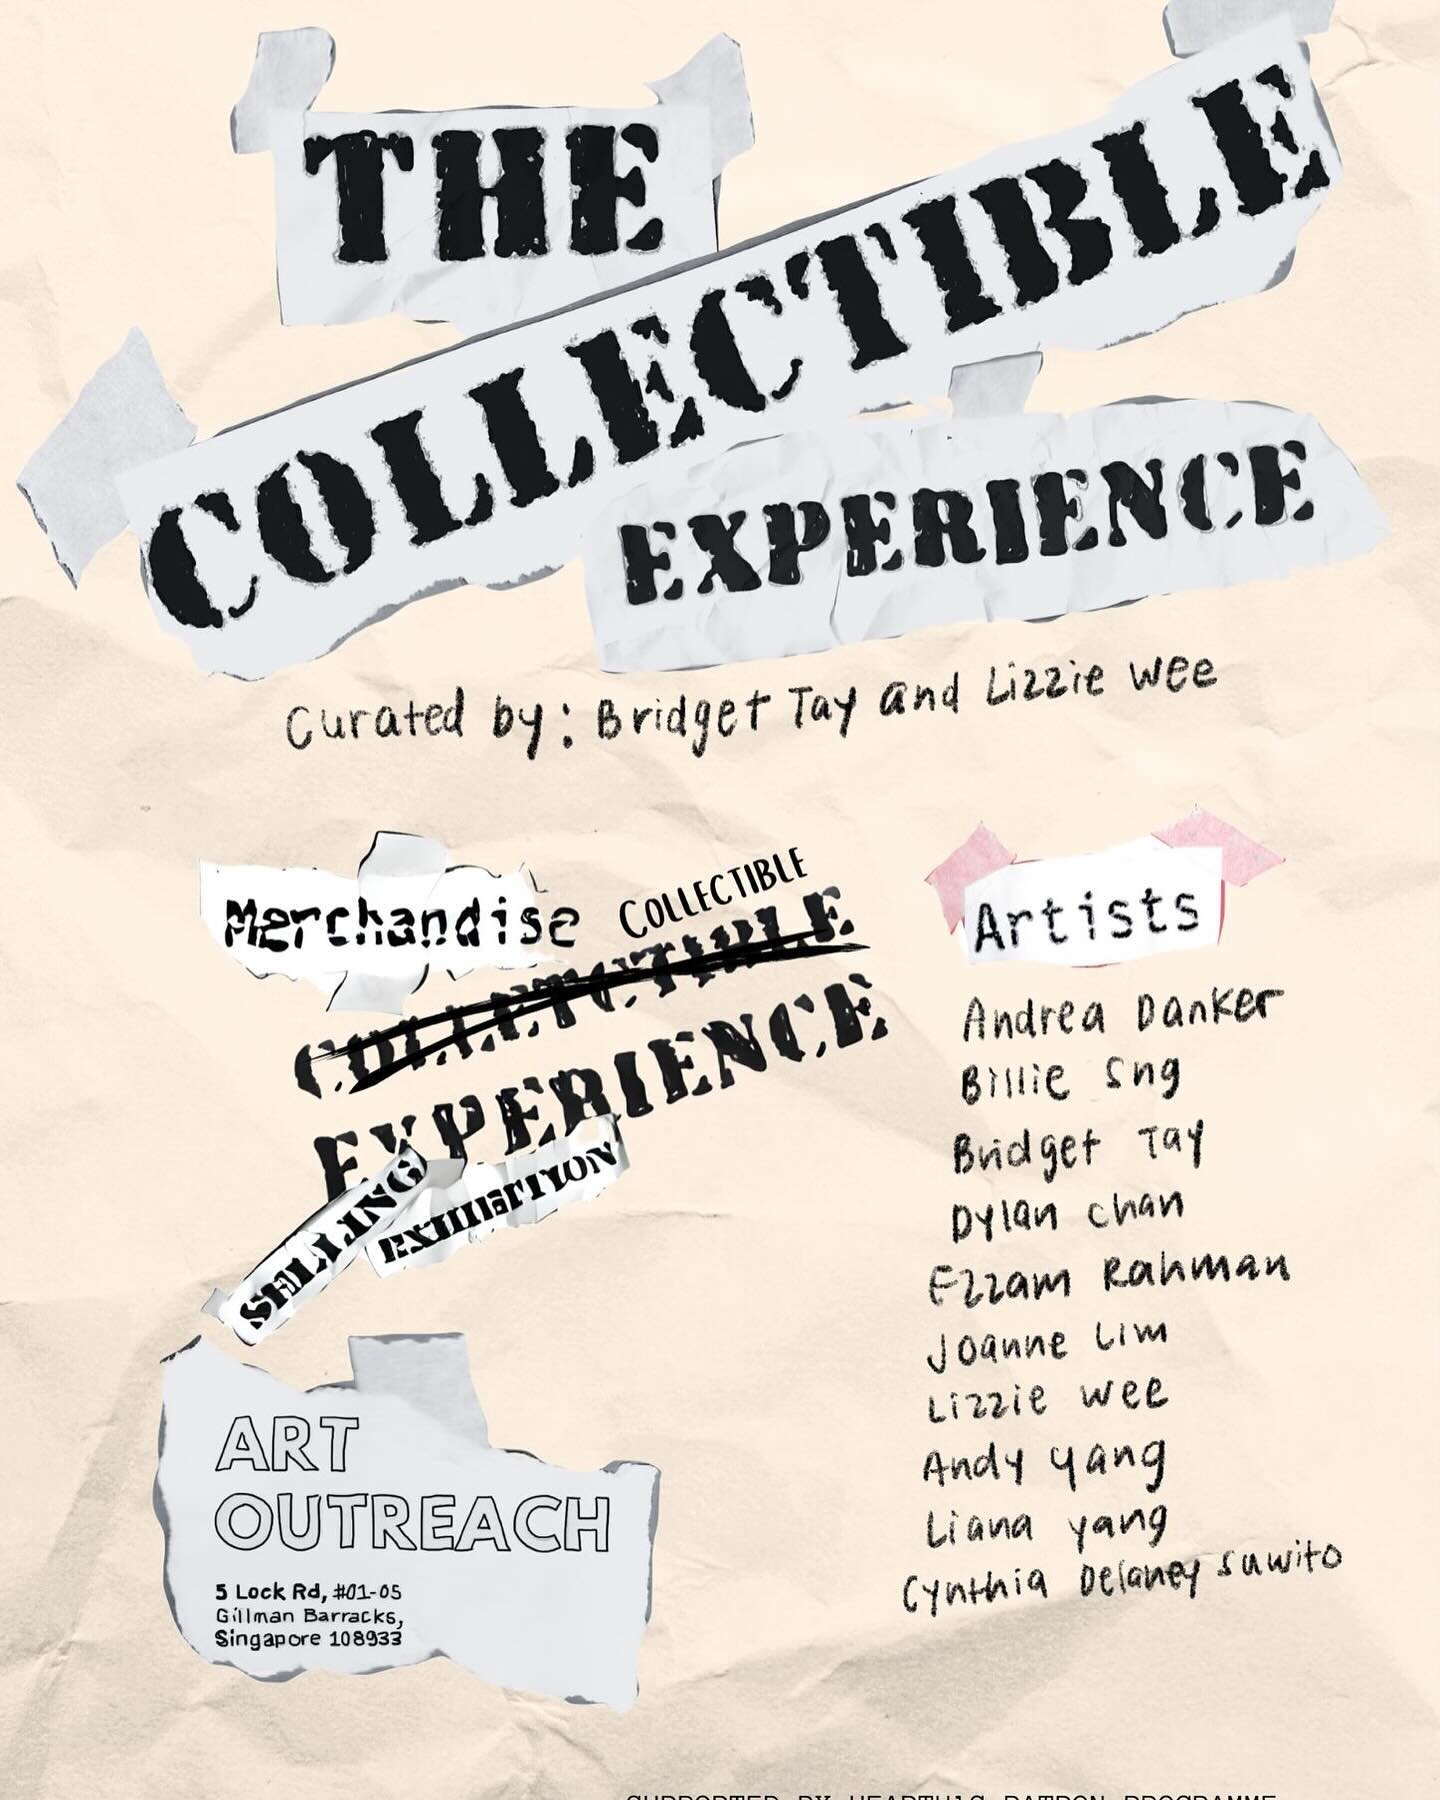 Hi Everyone! I&rsquo;m super excited and grateful to be part of the artist lineup showcasing at The Collectible Experience, opening at @artoutreachsingapore on April 13th! ❤️

Curated by @bbridgettay and @lizzieweee, the show explores the concept of 